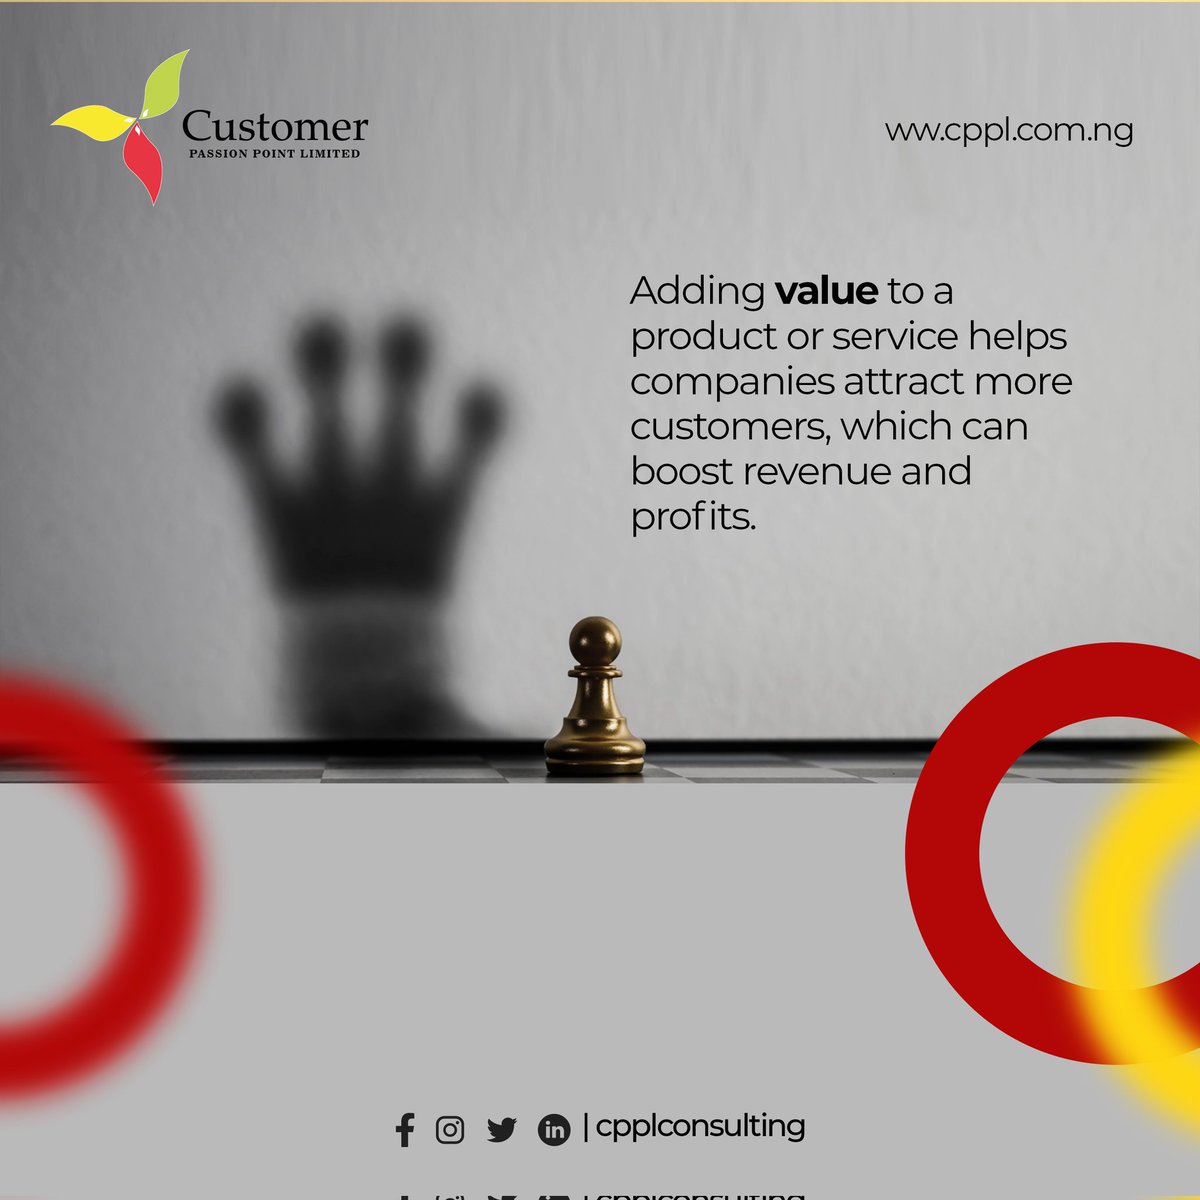 Adding value builds trust with your customers. The more you help them through your knowledge, content and resources, the more they trust you. To give real service, create an unforgettable experience that money can't be bought or measured.
#digitalmarketingservices #corporateimage